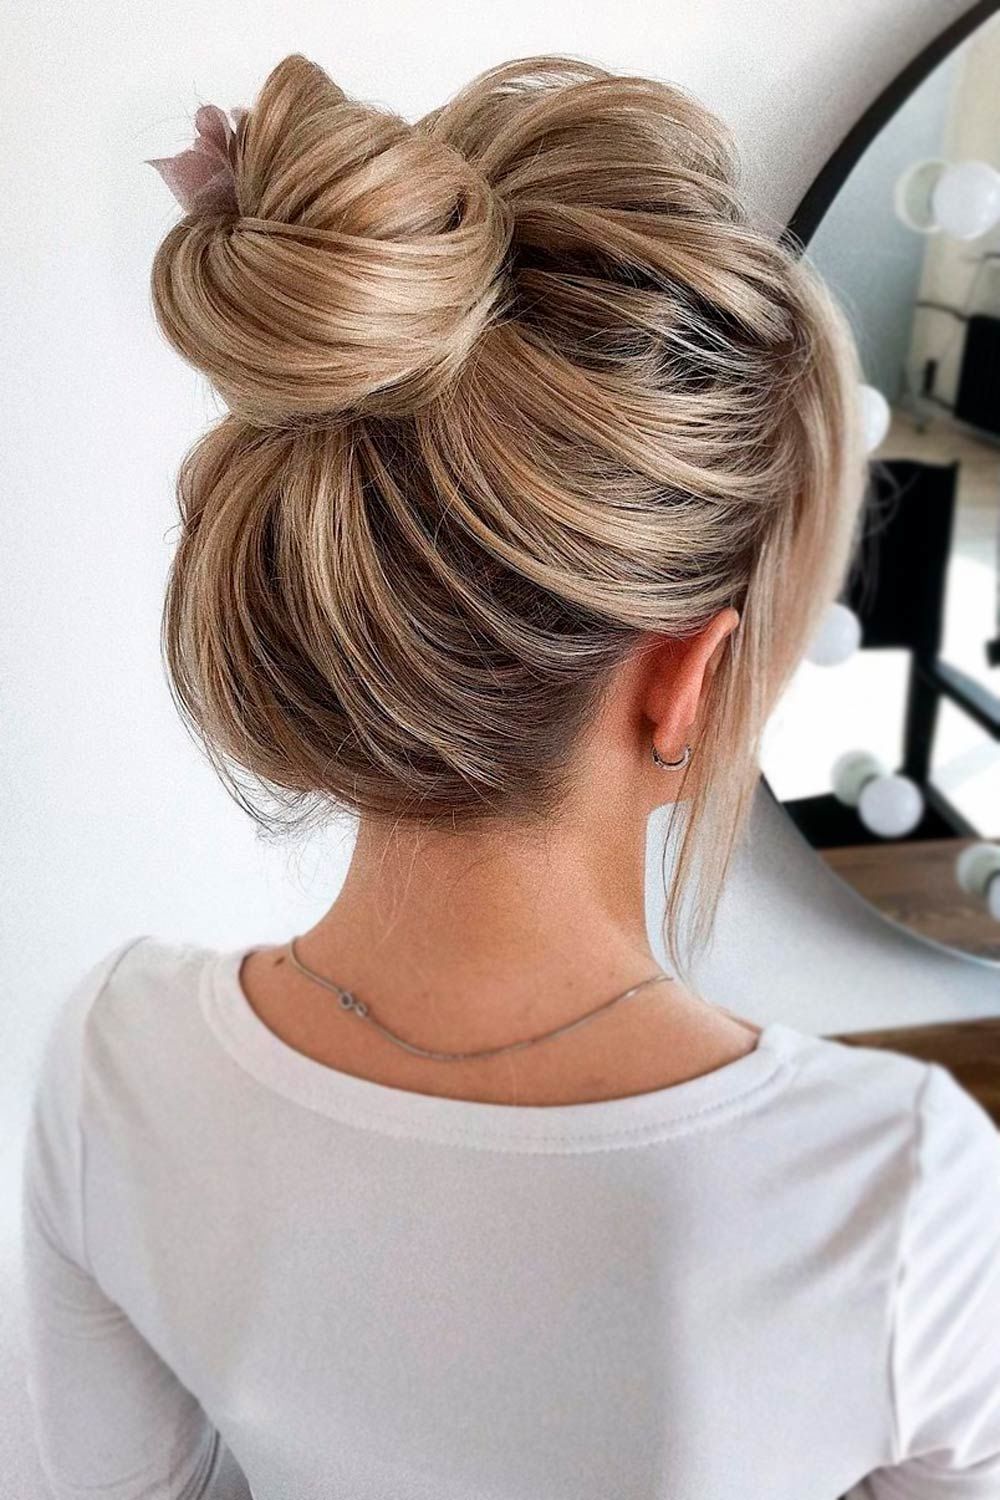 Easy Buns For Hot Weather